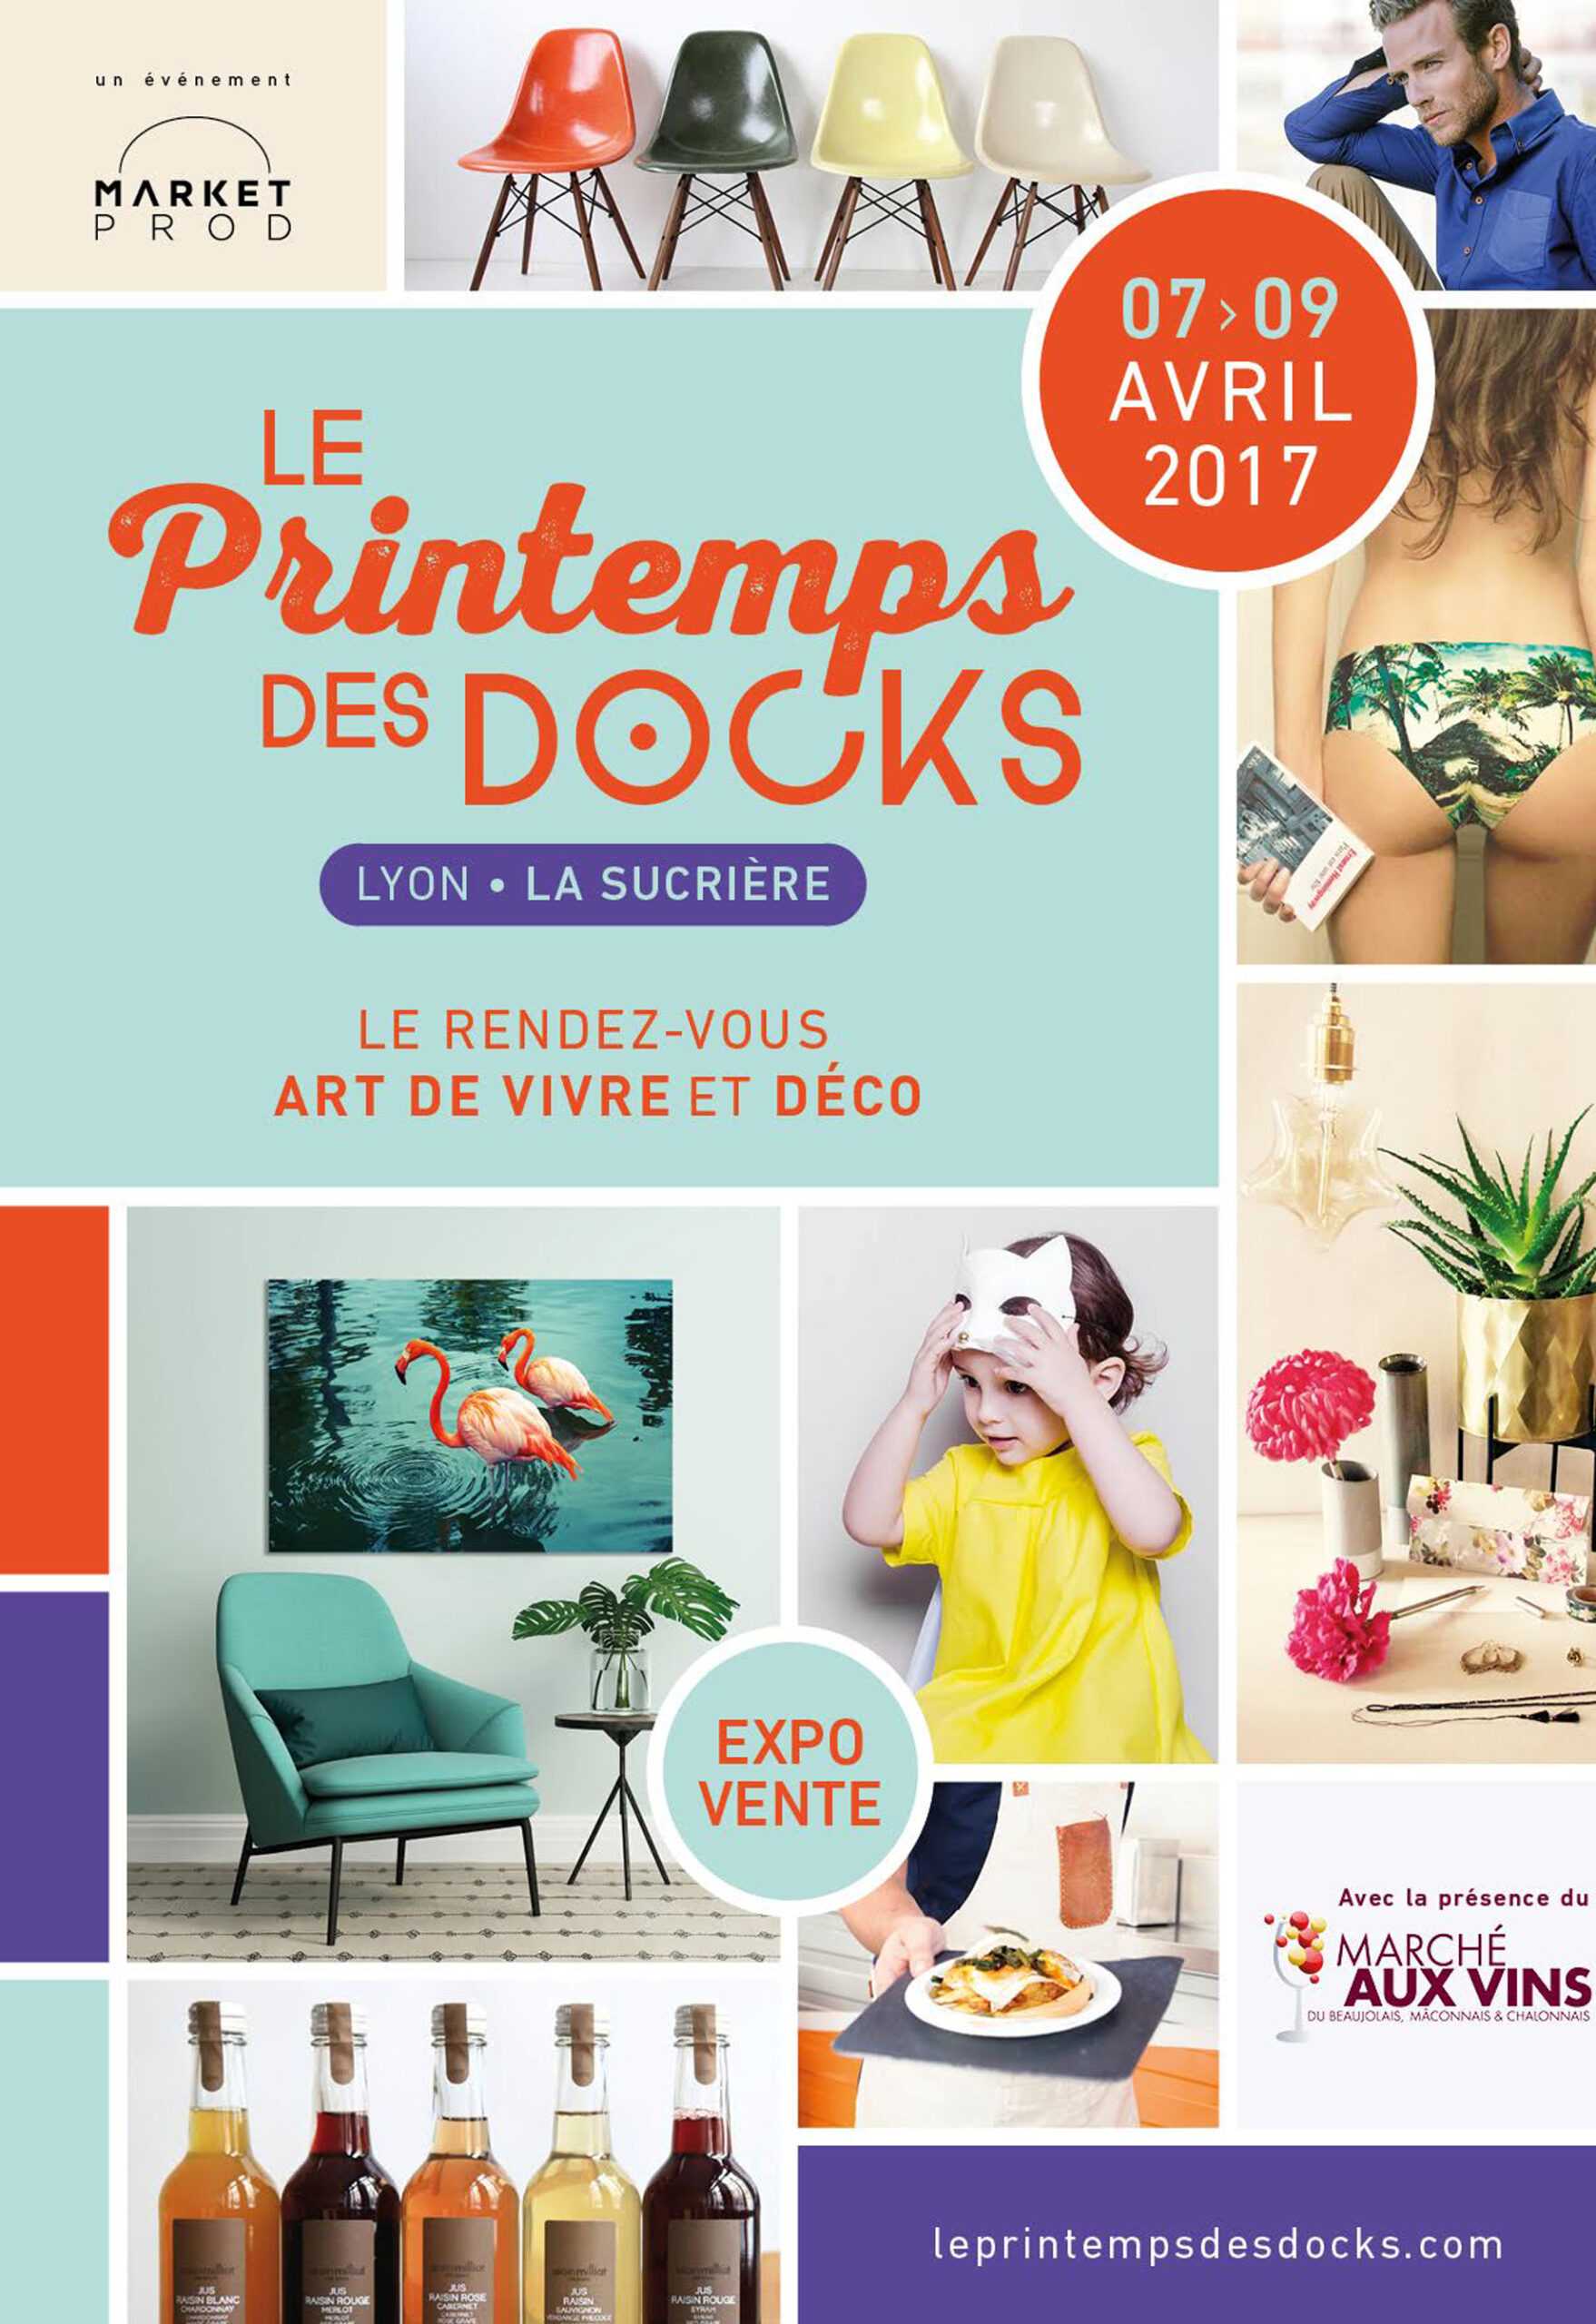 You are currently viewing Printemps des docks